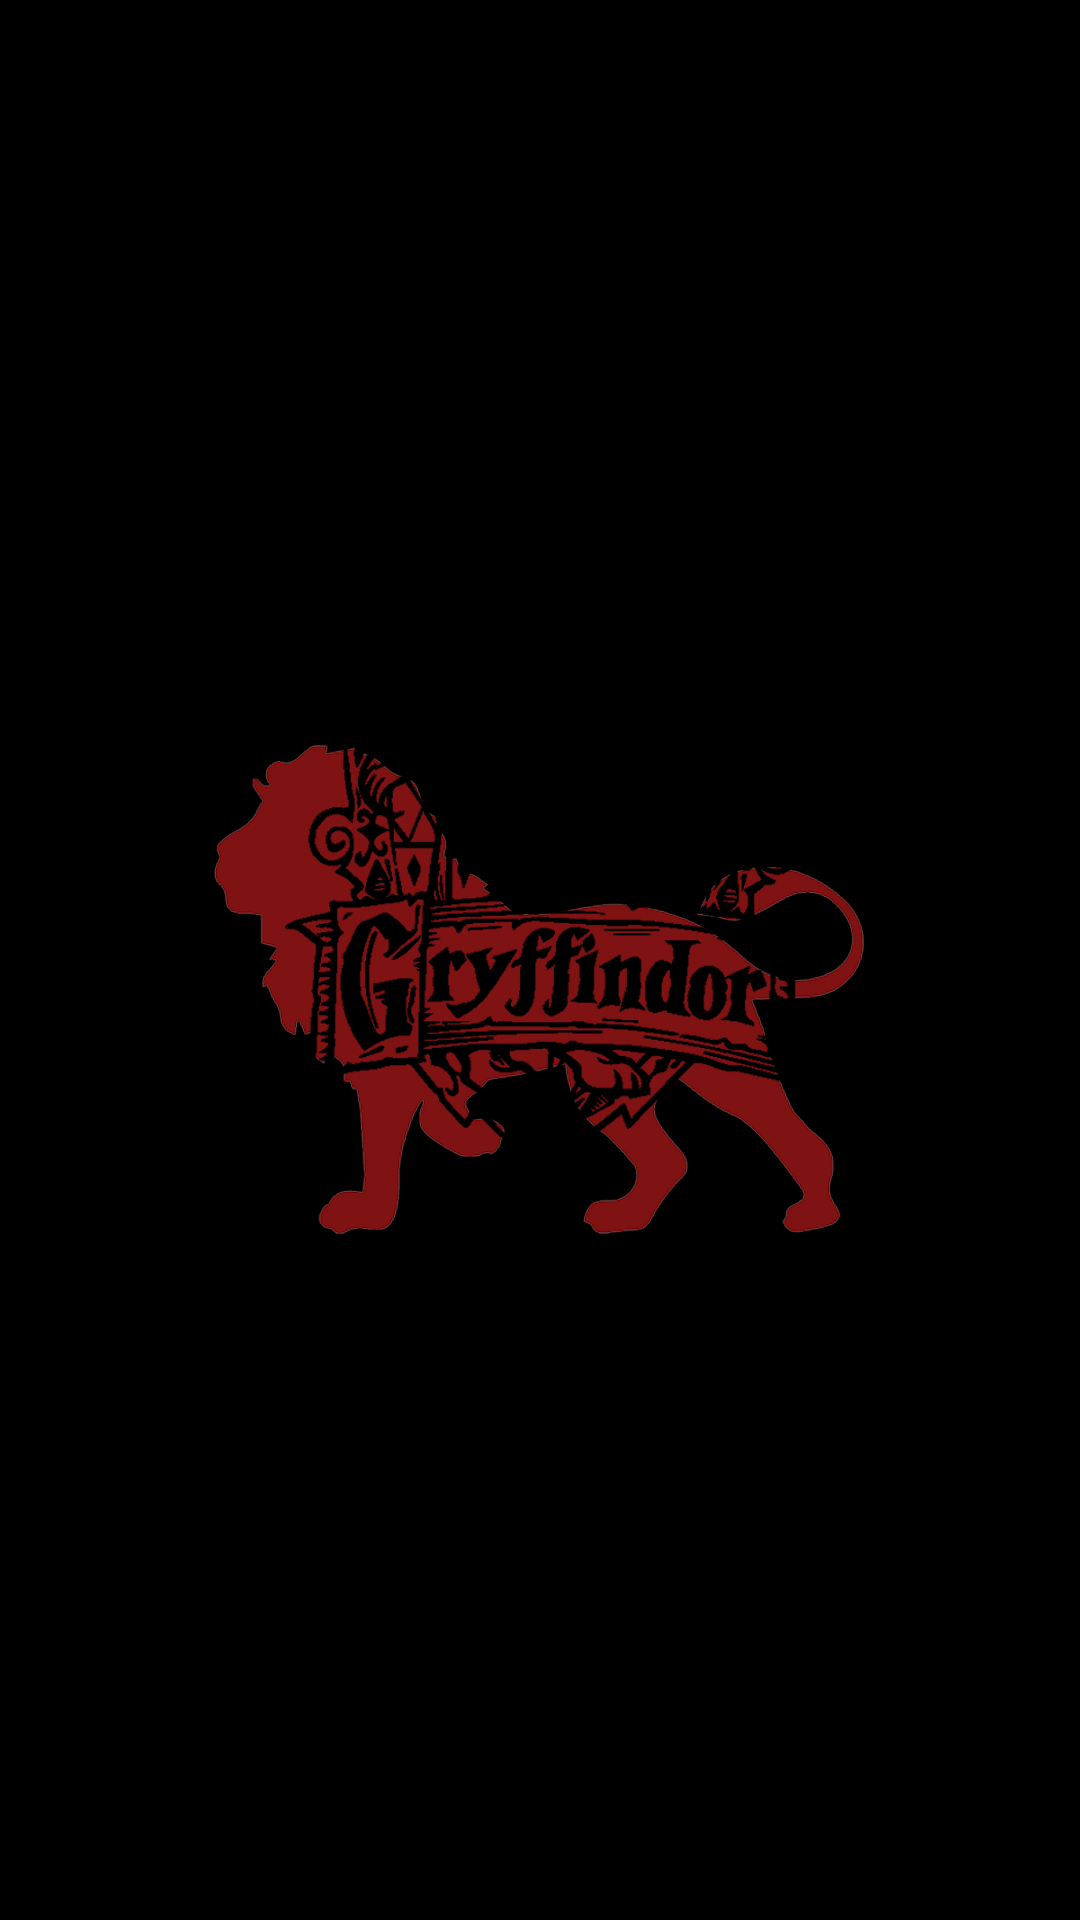 Hp gryffindor wallpapers